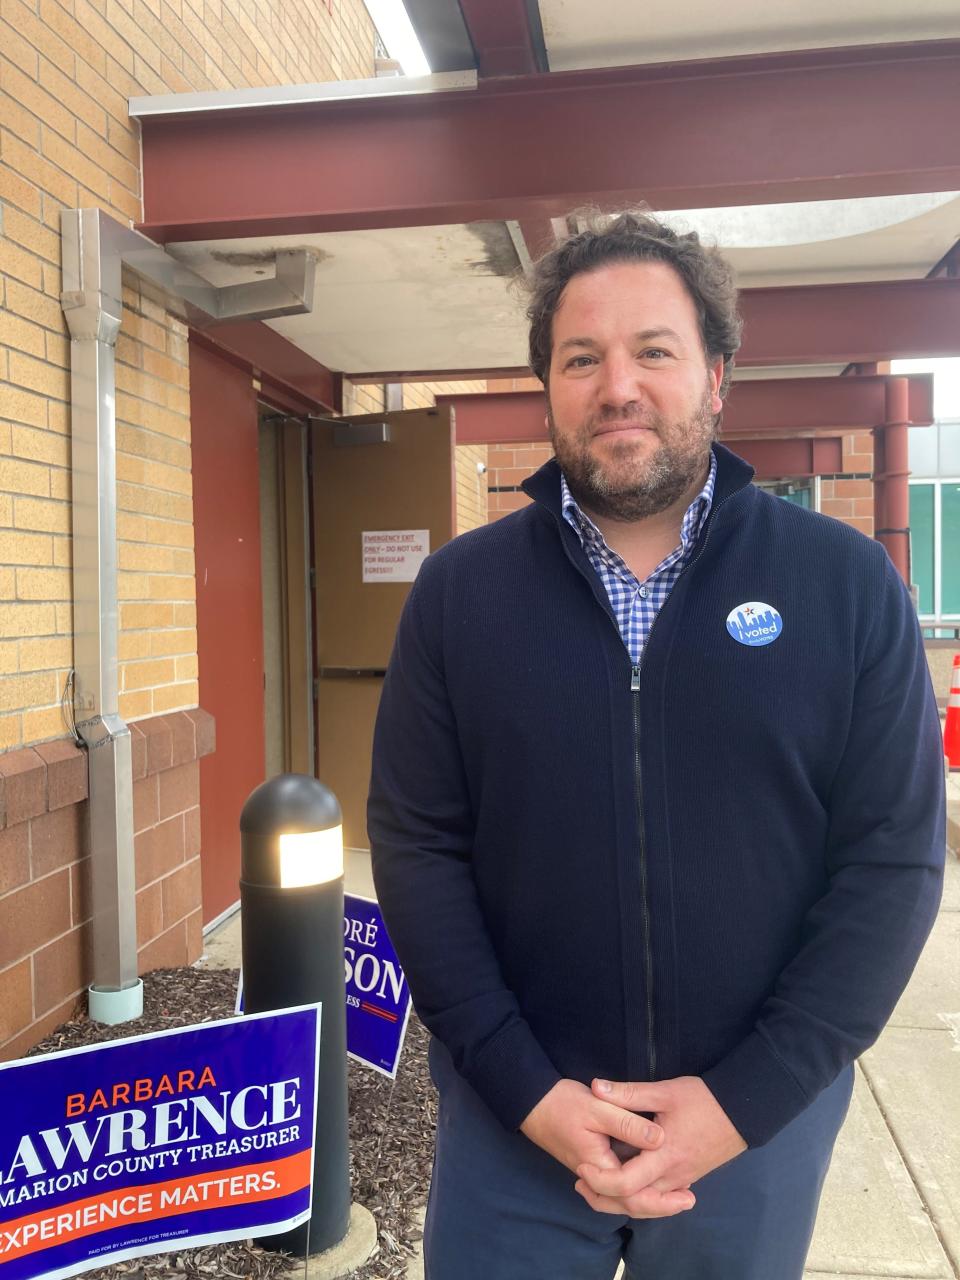 Andy Helmbock, 42, said he voted for Brad Chambers for Indiana governor. Helmbock told IndyStar he was previously a Democrat, but now identifies as an Independent.